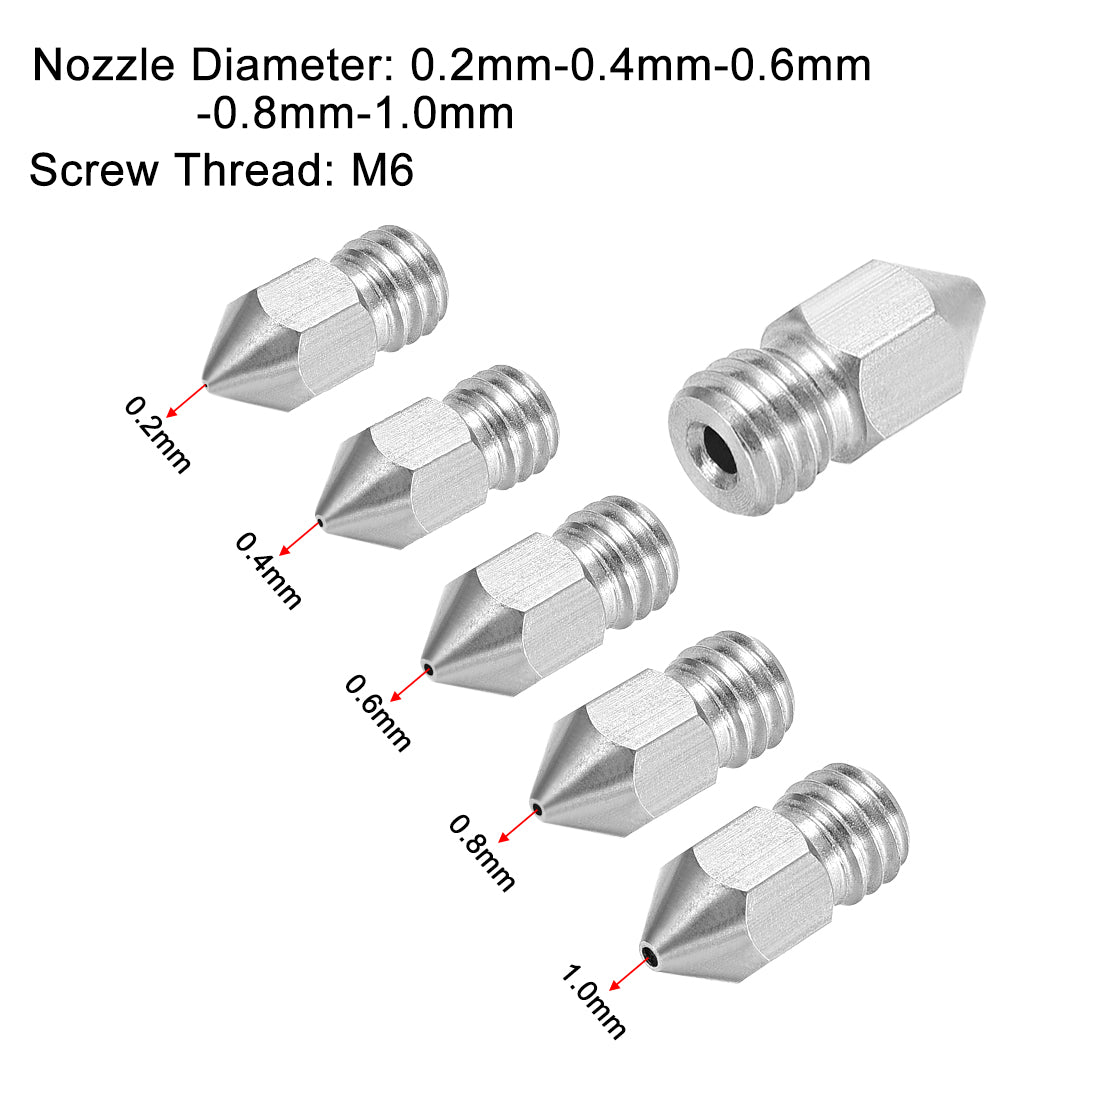 uxcell Uxcell 3D Printer Nozzle Fit for MK8, for 1.75mm Filament Stainless Steel,0.2mm - 1mm Total 5pcs